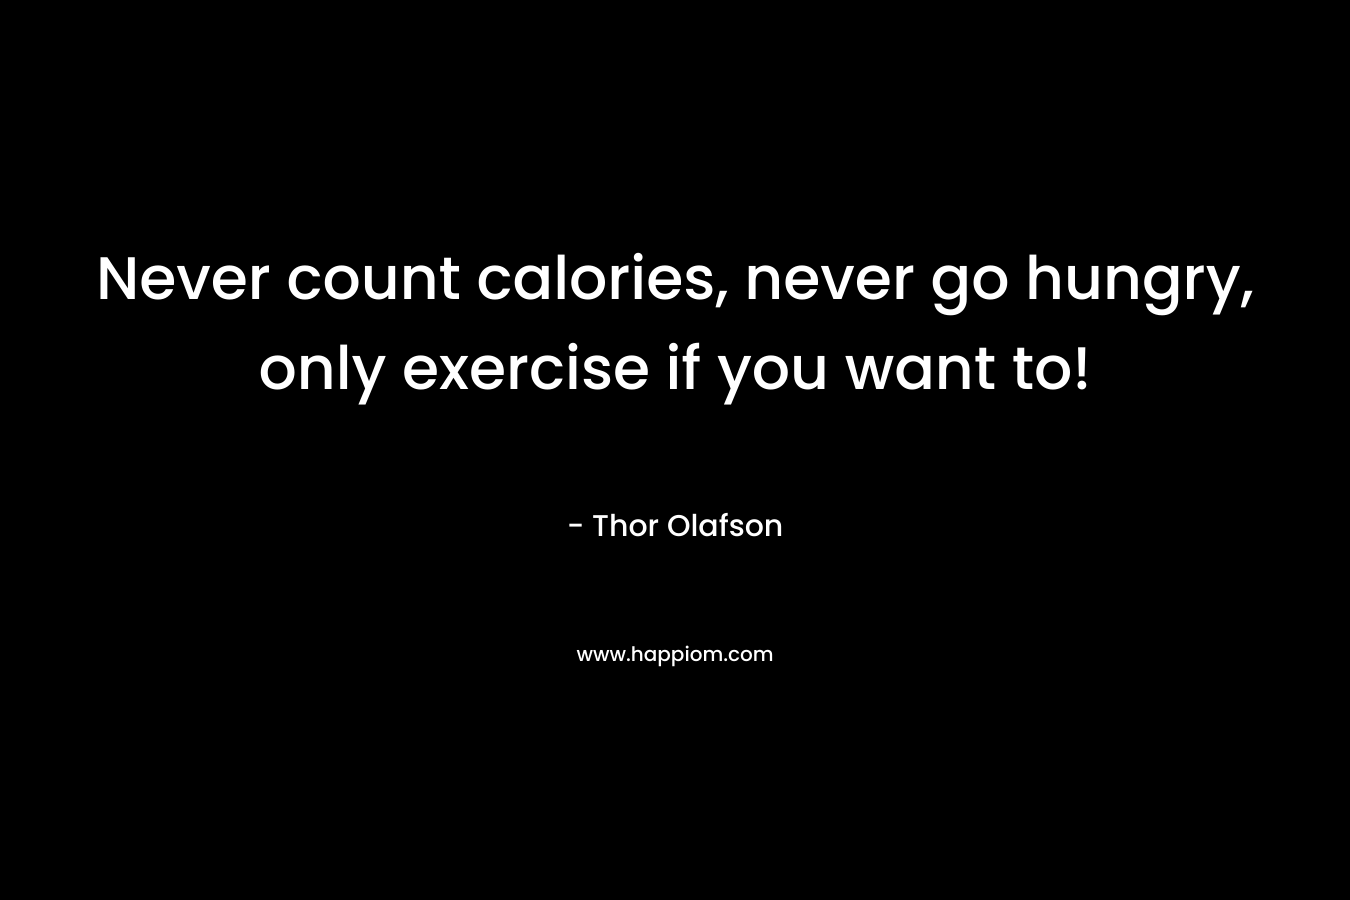 Never count calories, never go hungry, only exercise if you want to! – Thor Olafson